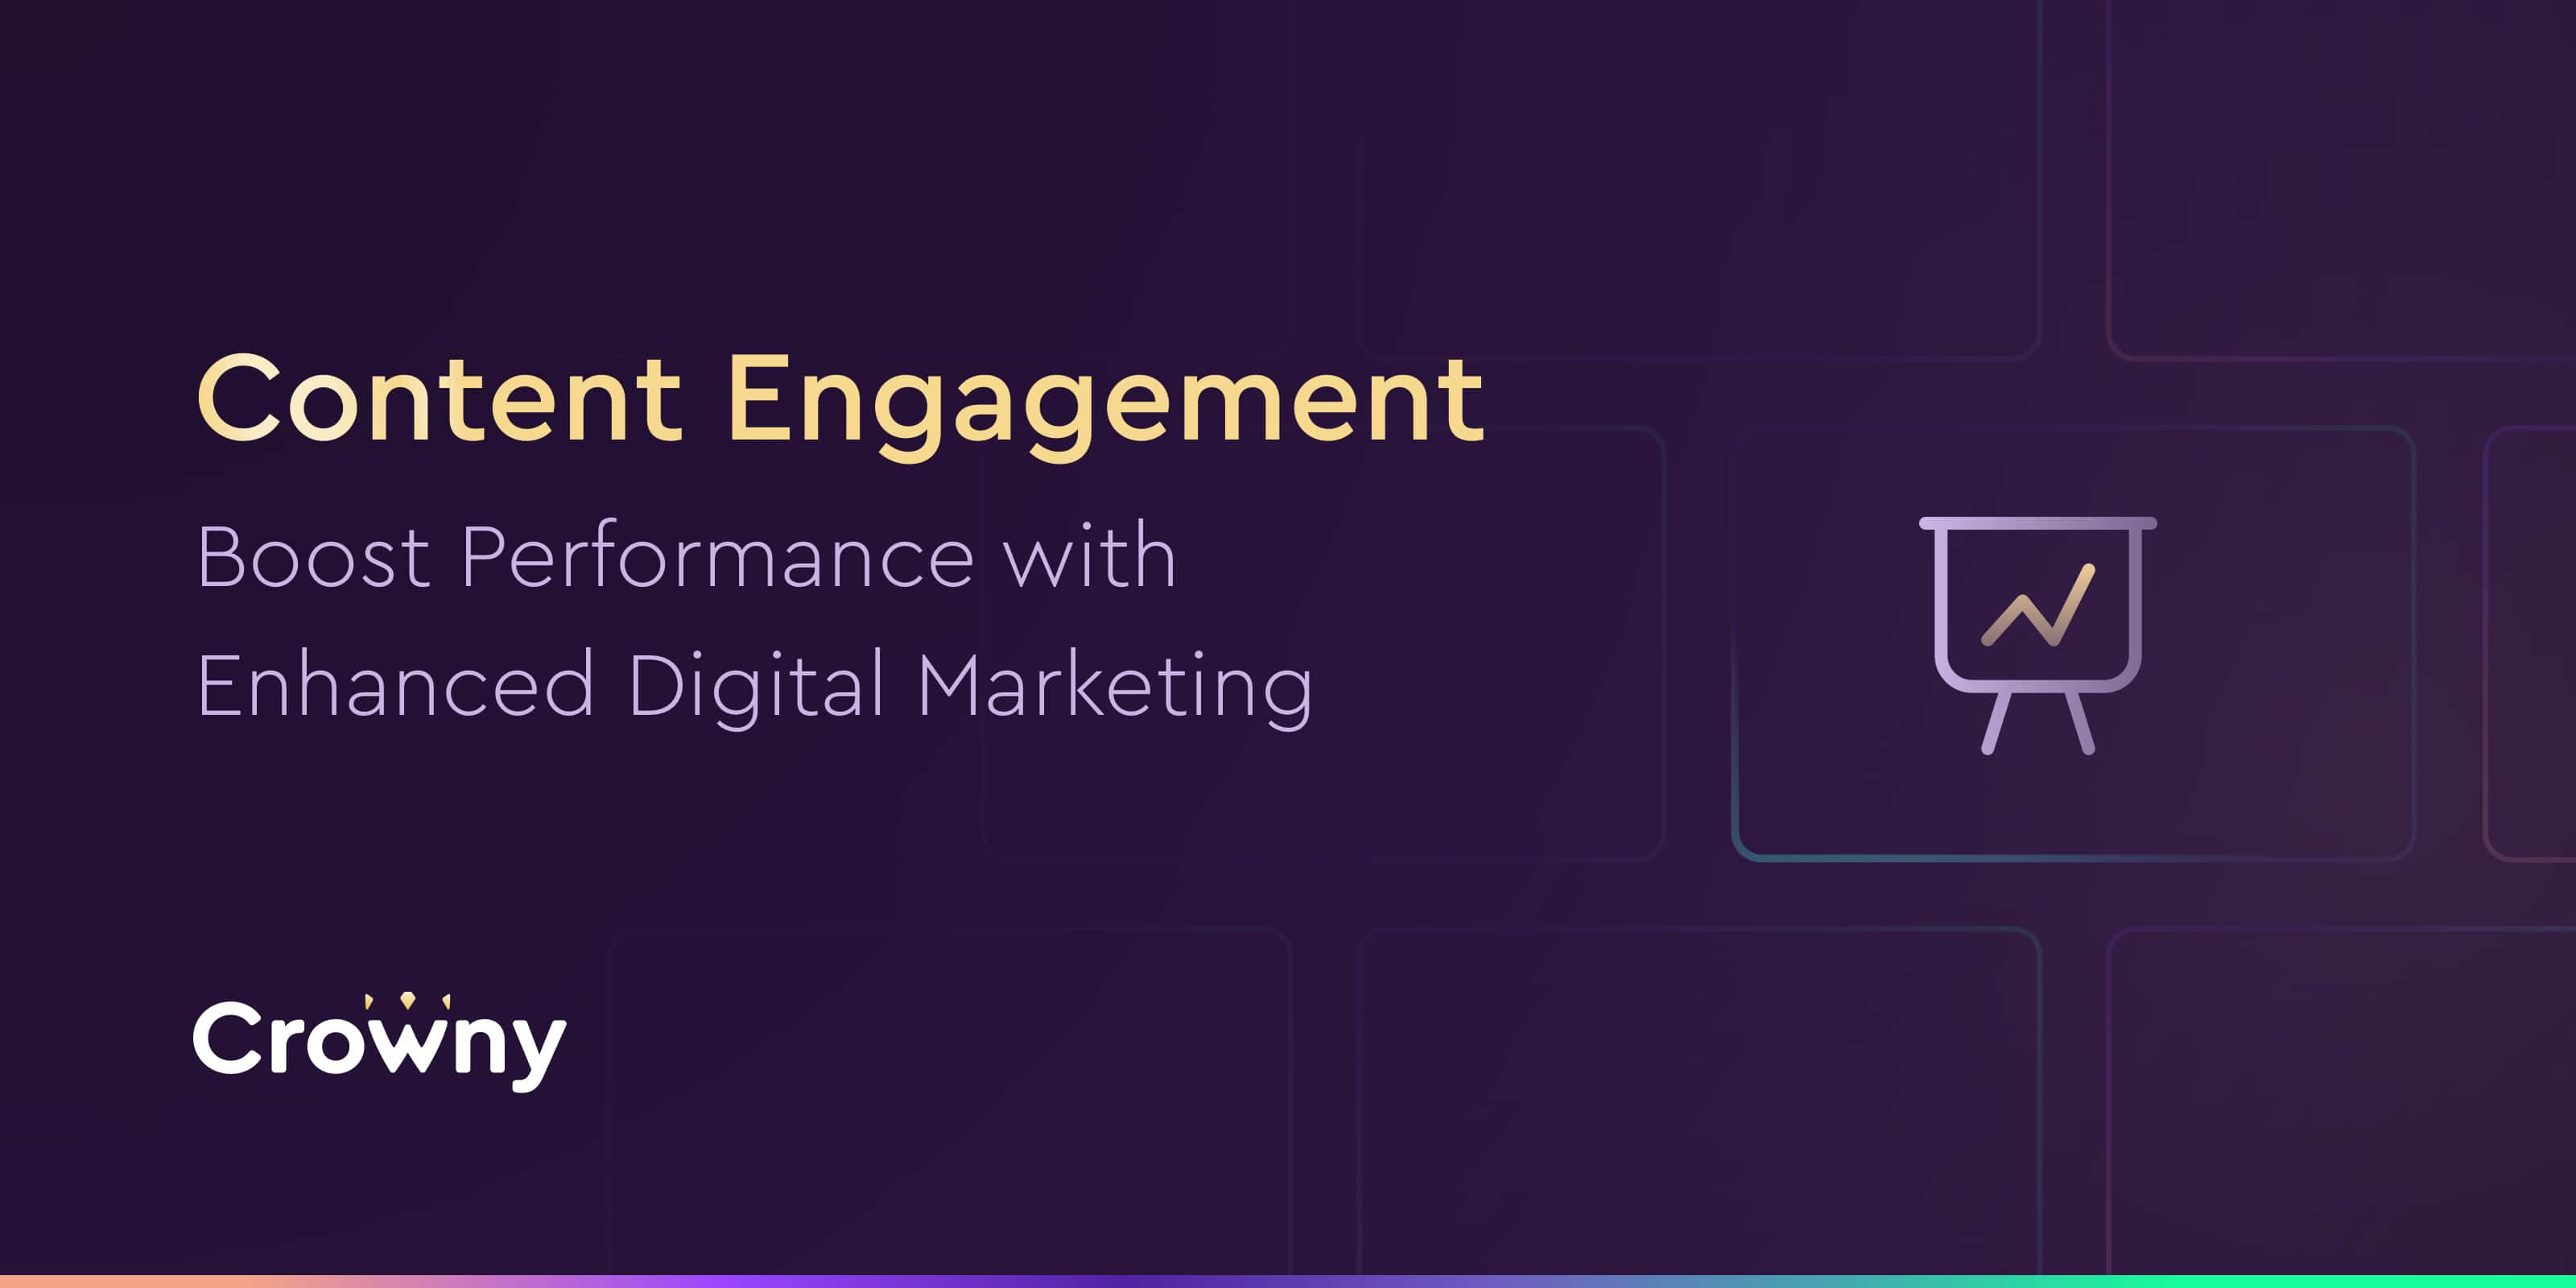 content engagement - boost performance with enhanced digital marketing